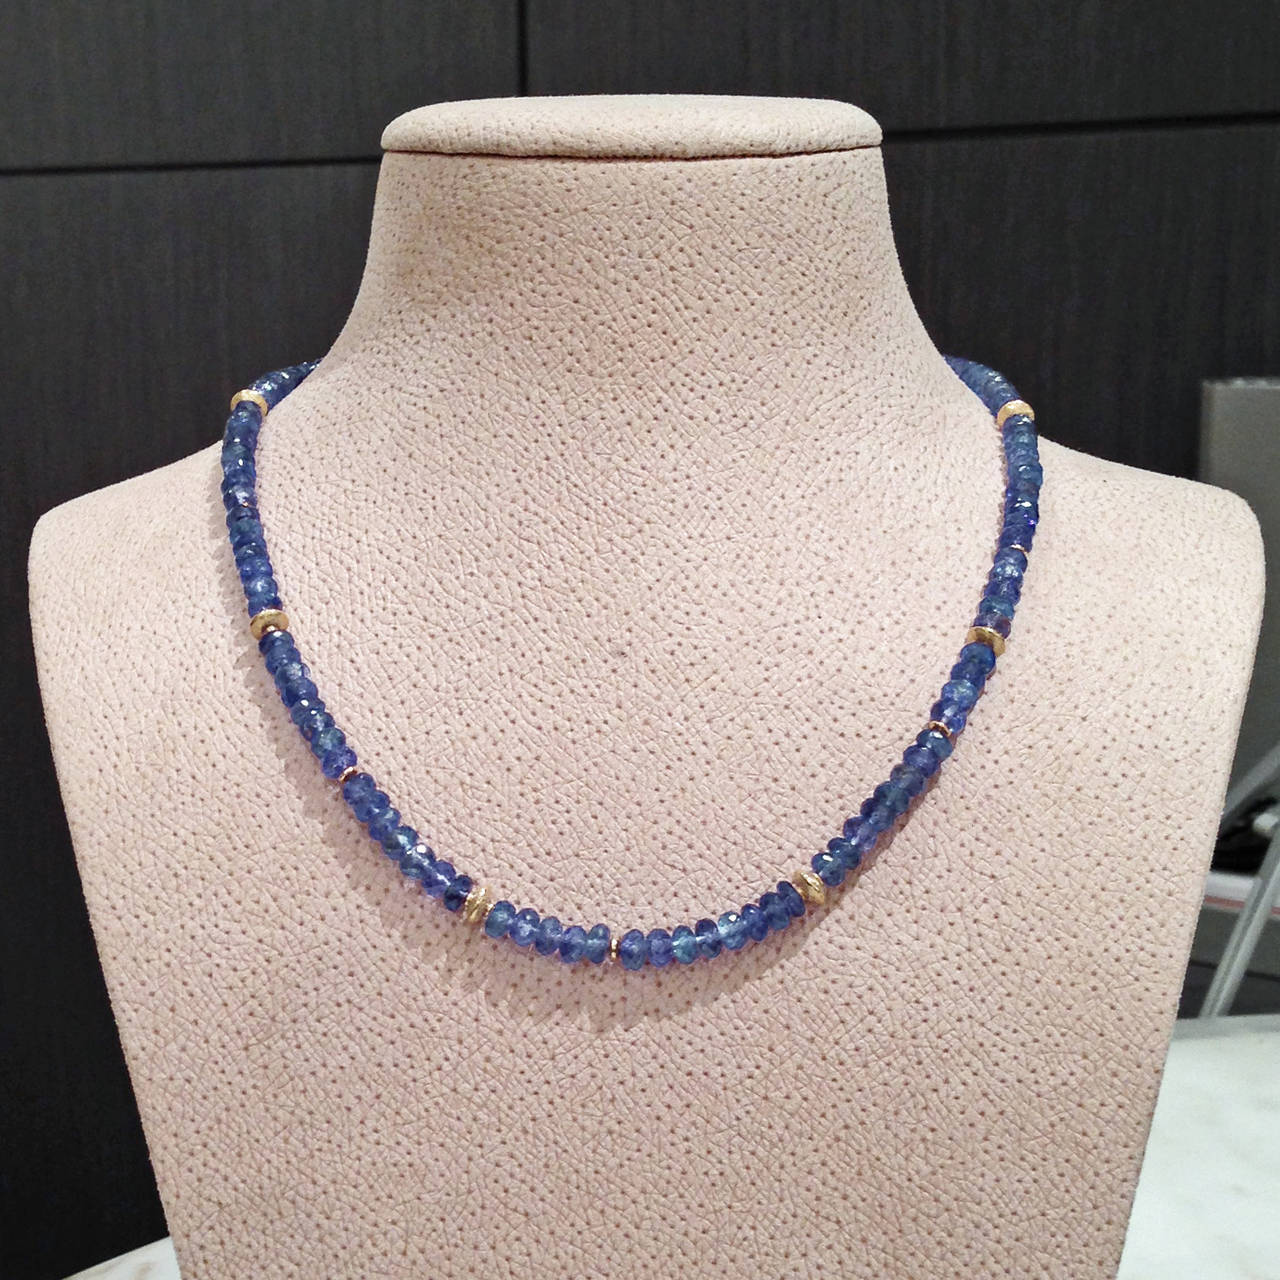 One-of-a-Kind Tanzanite Necklace handcrafted by award winning jewelry artist Barbara Heinrich showcasing faceted tanzanite beads and accented by  assorted matte 18k yellow gold spacers and an 18k yellow gold wavy toggle clasp. 17.25 inches in